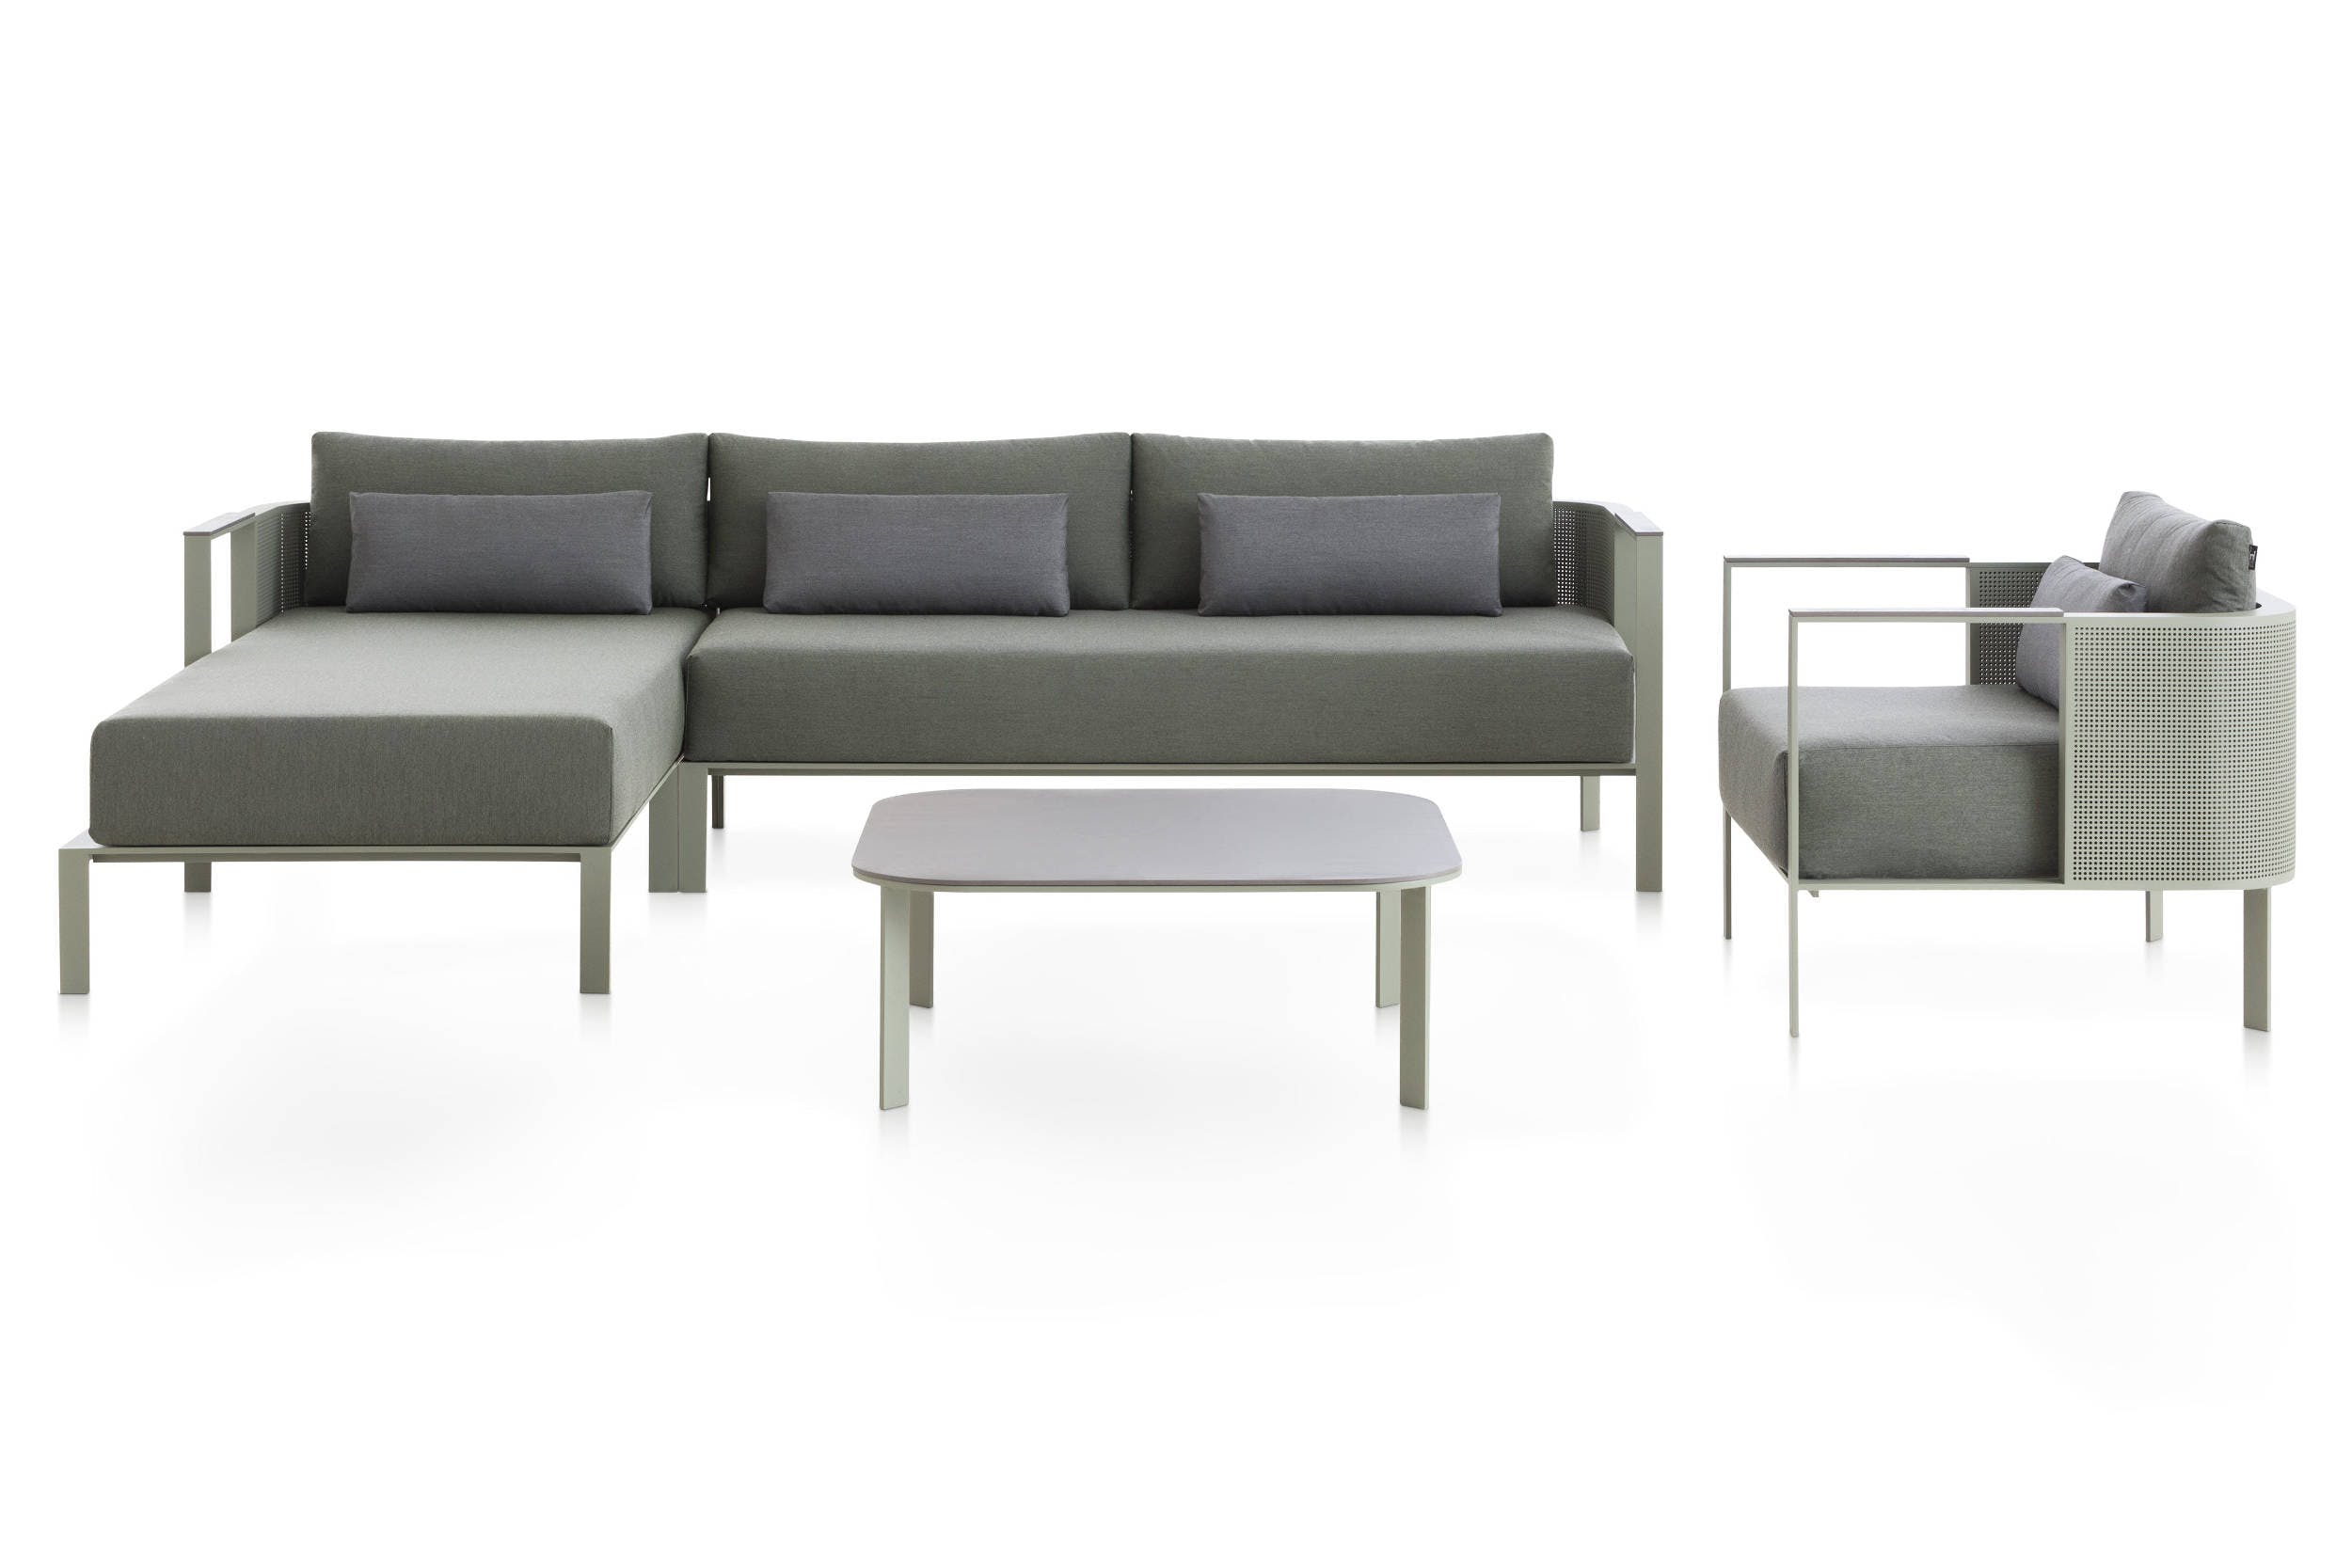 Image of Solanas composition 2 1 in Outdoors spaces that break design boundaries with indoors - Cosentino